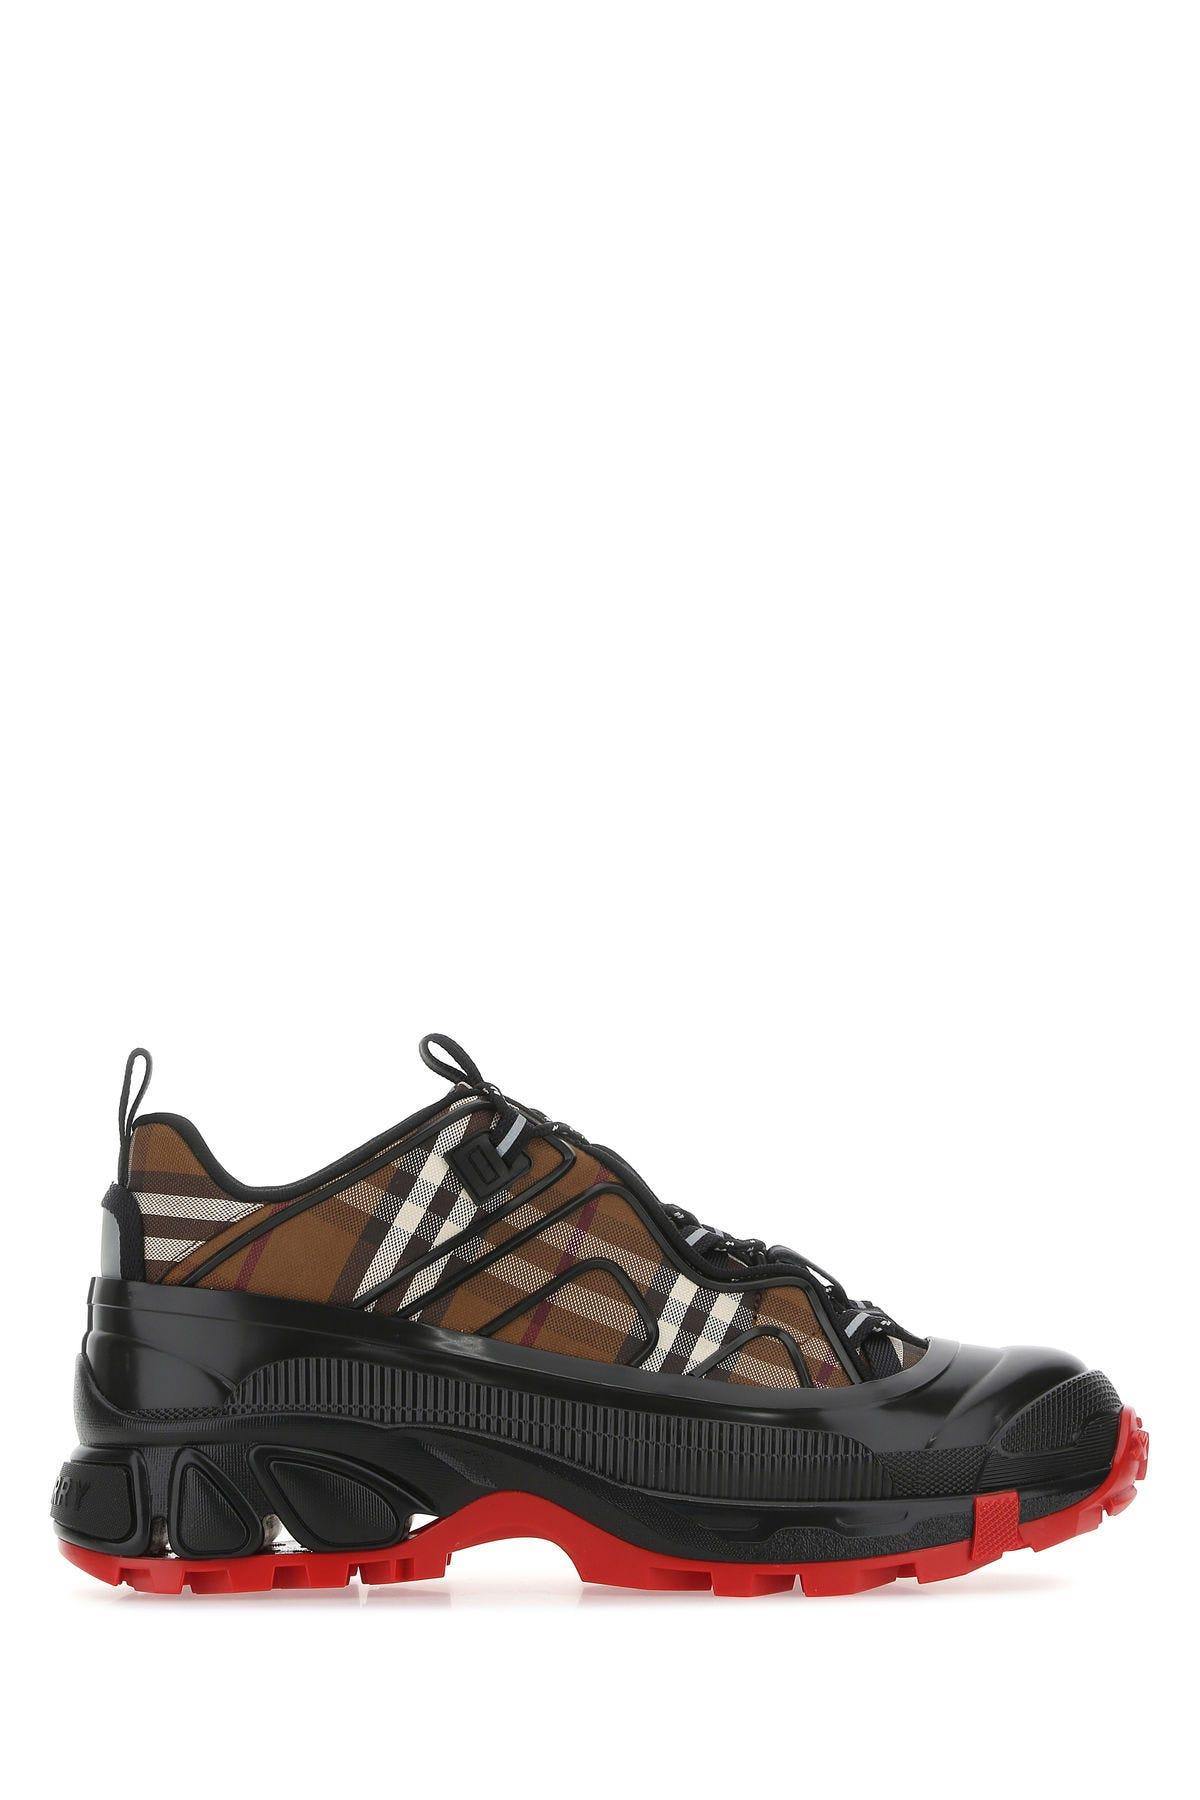 BURBERRY MULTICOLOR RUBBER AND FABRIC ARTHUR SNEAKERS